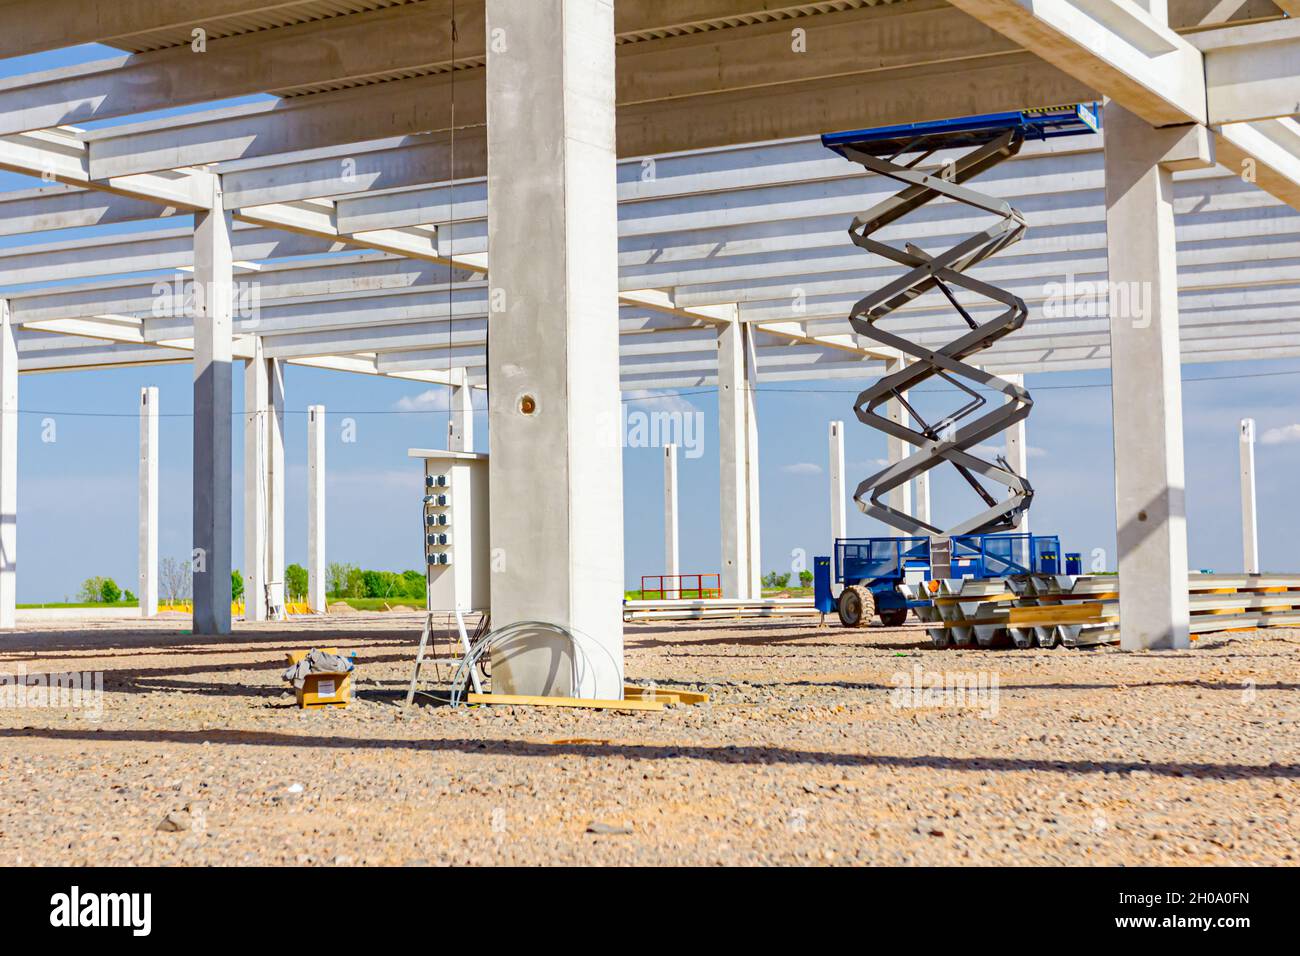 Scissor lift platform with stretched hydraulic system at maximum height range under building skeleton. Stock Photo